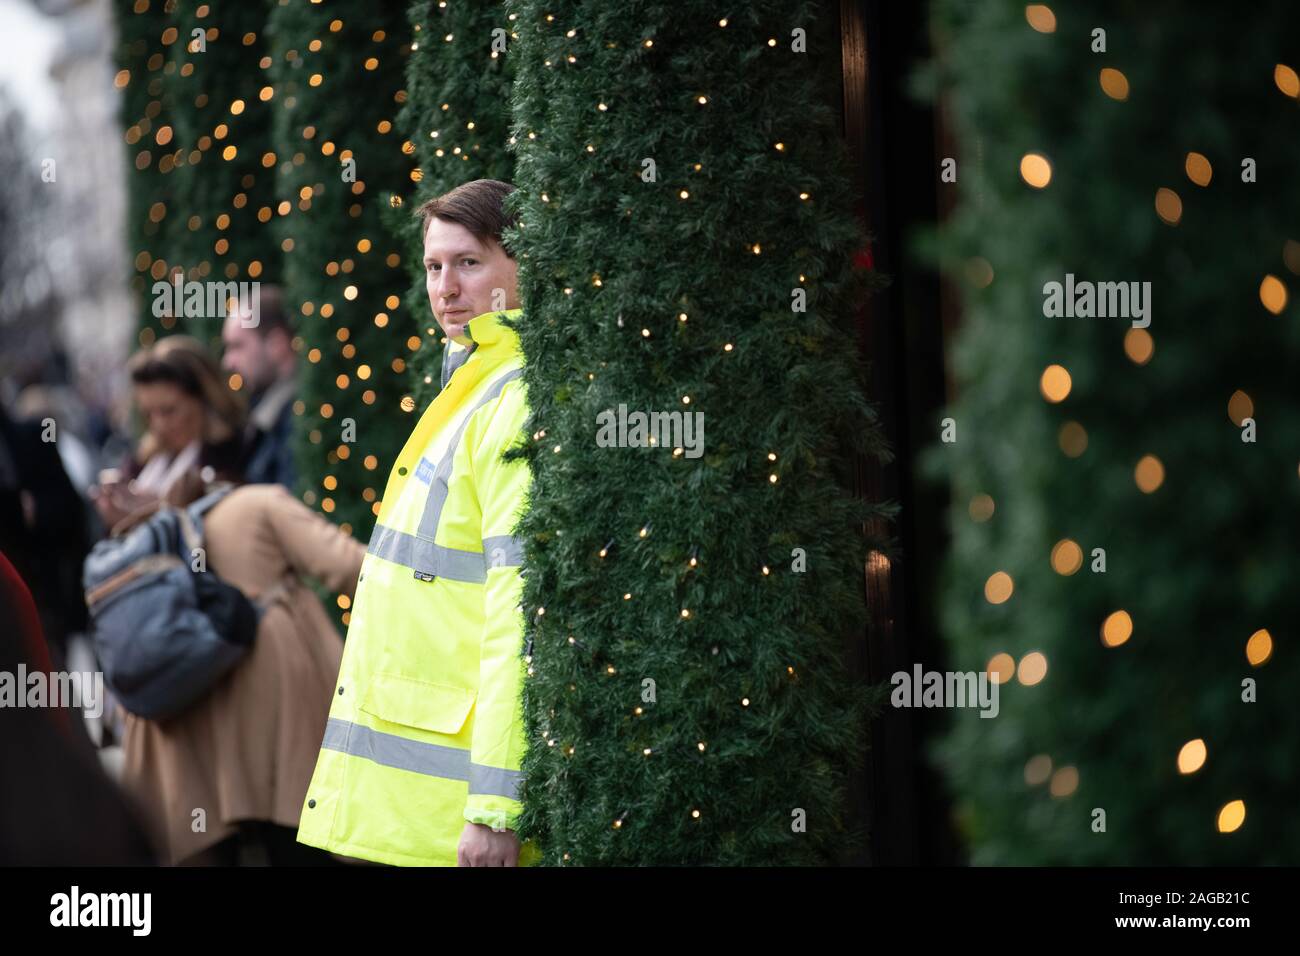 Selfridges staff member standing between the Christmas trees outside Selfridges and looking into the camera Stock Photo